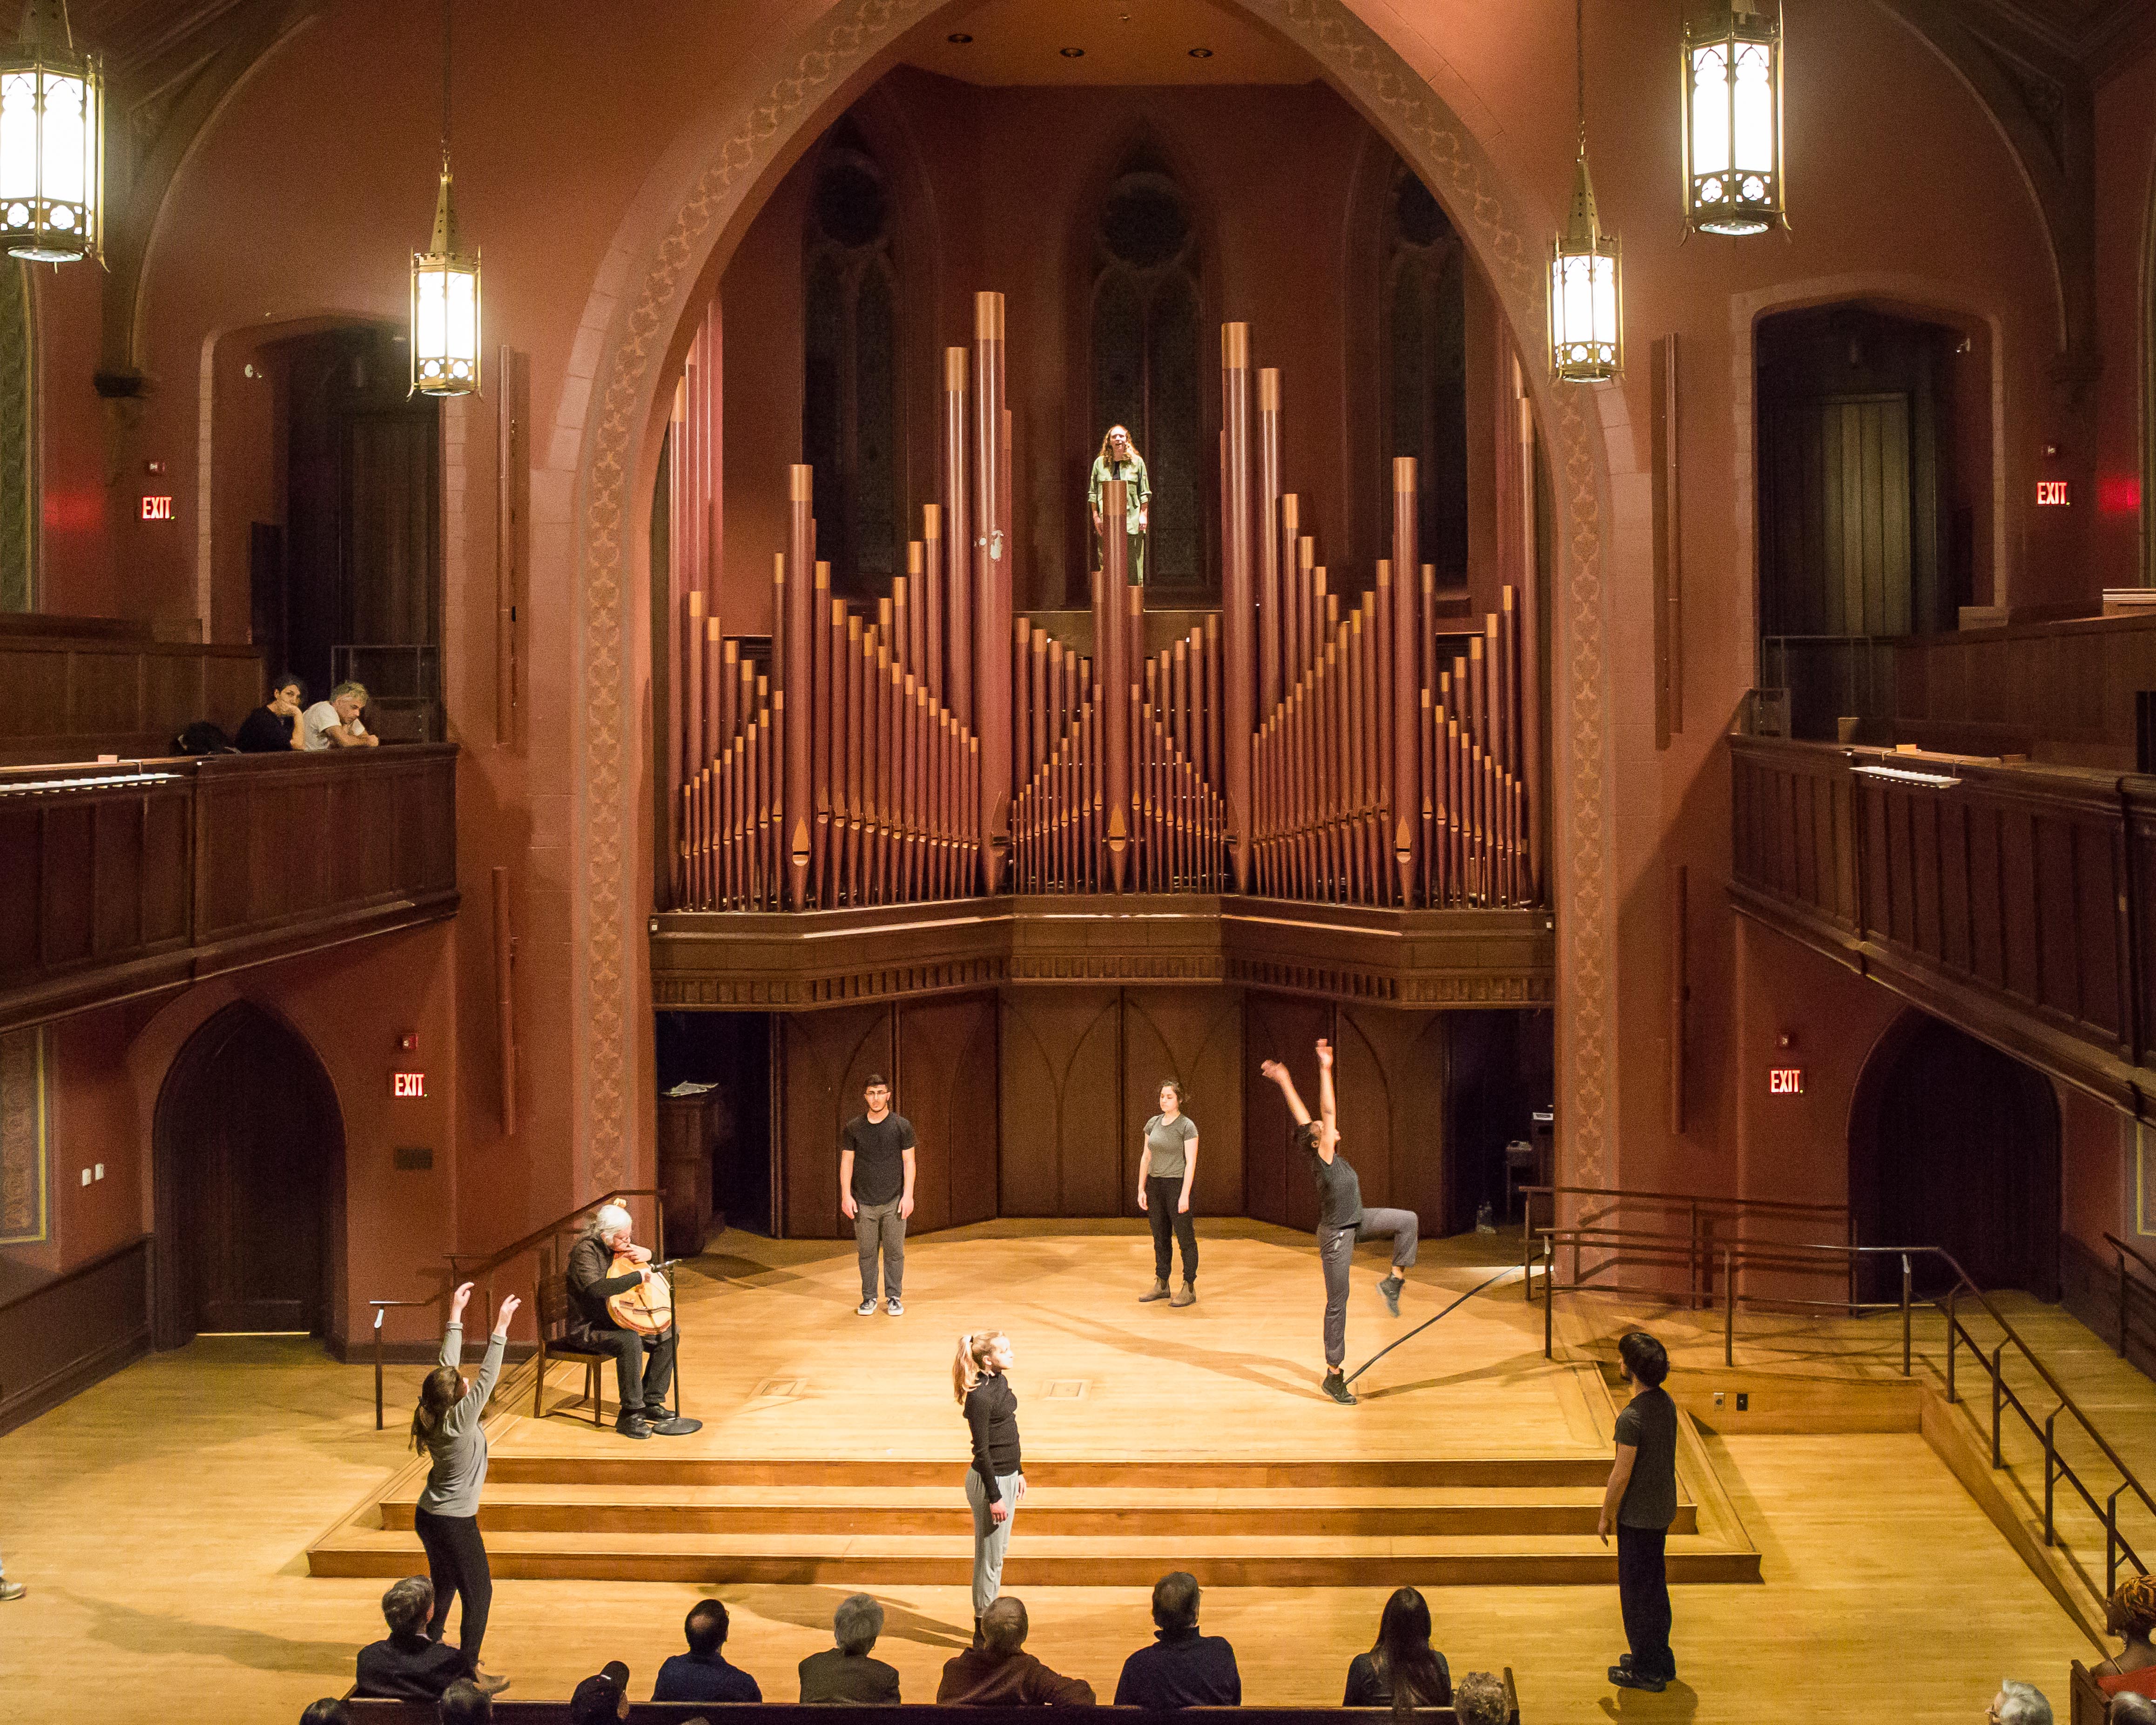 The multimedia work, directed by Kolcio, was performed by more than 40 musicians and dancers from Wesleyan and the surrounding community.